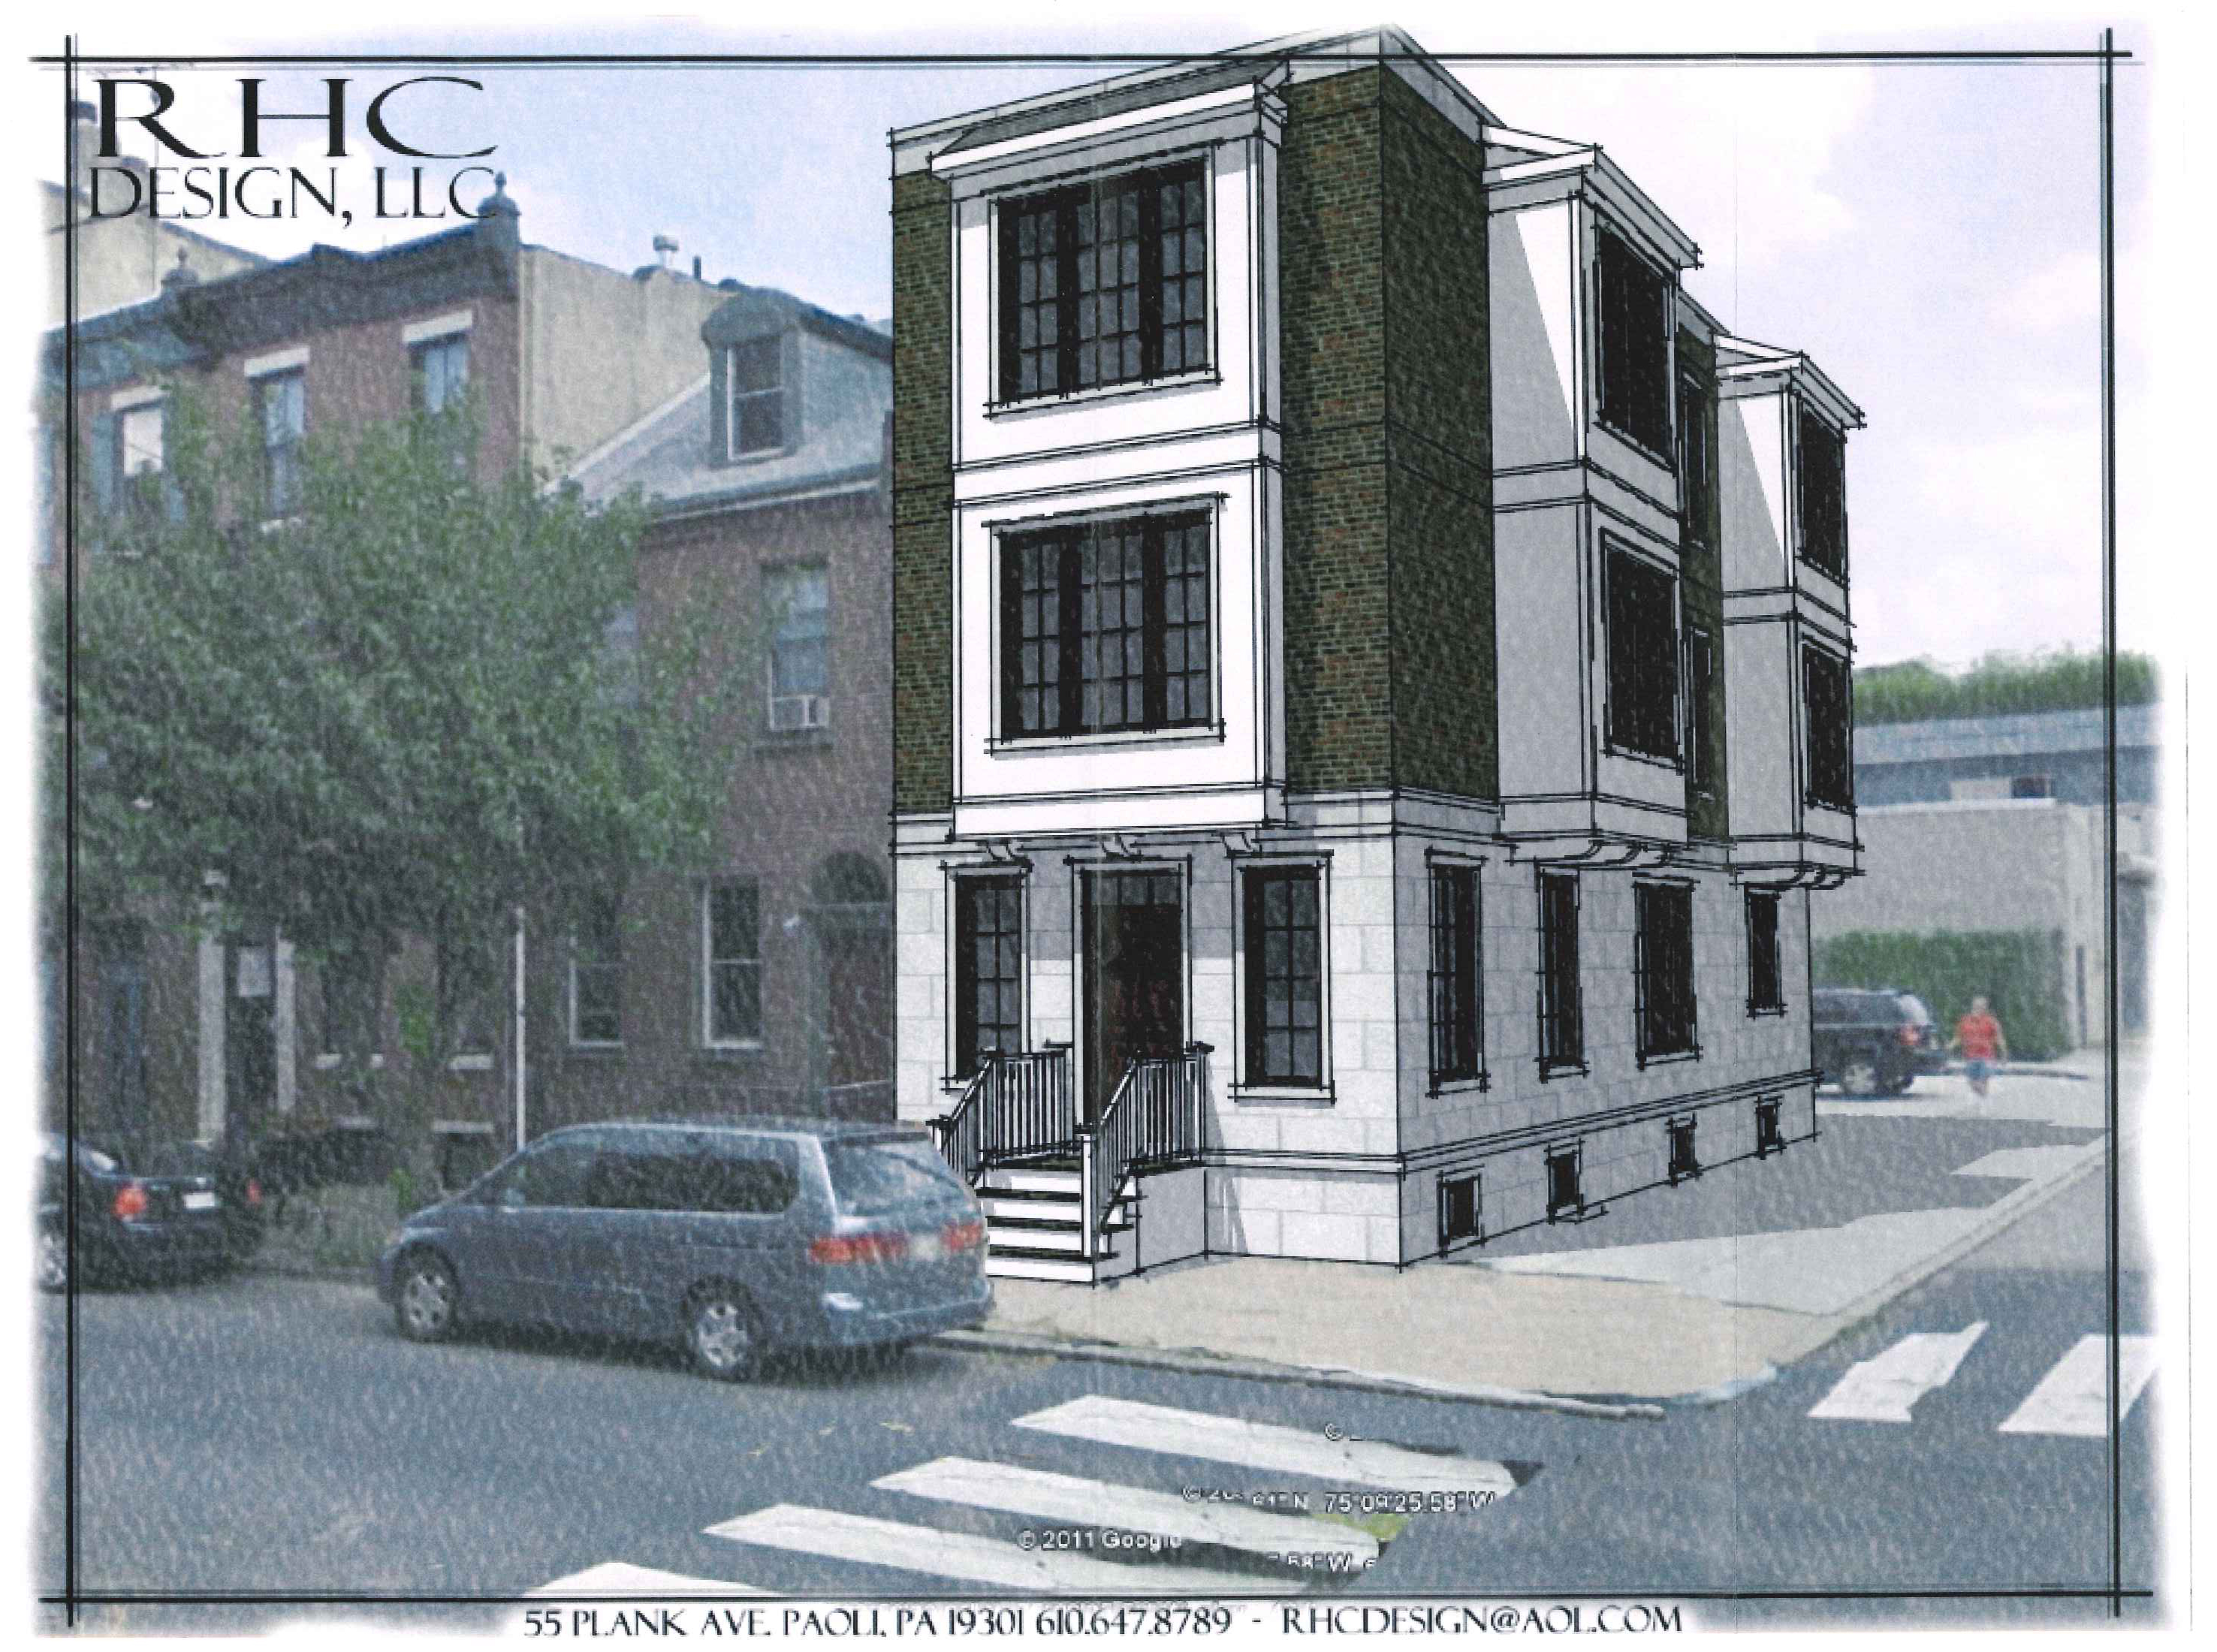 Preliminary design for the new development proposed for 631 S. 9th Street.